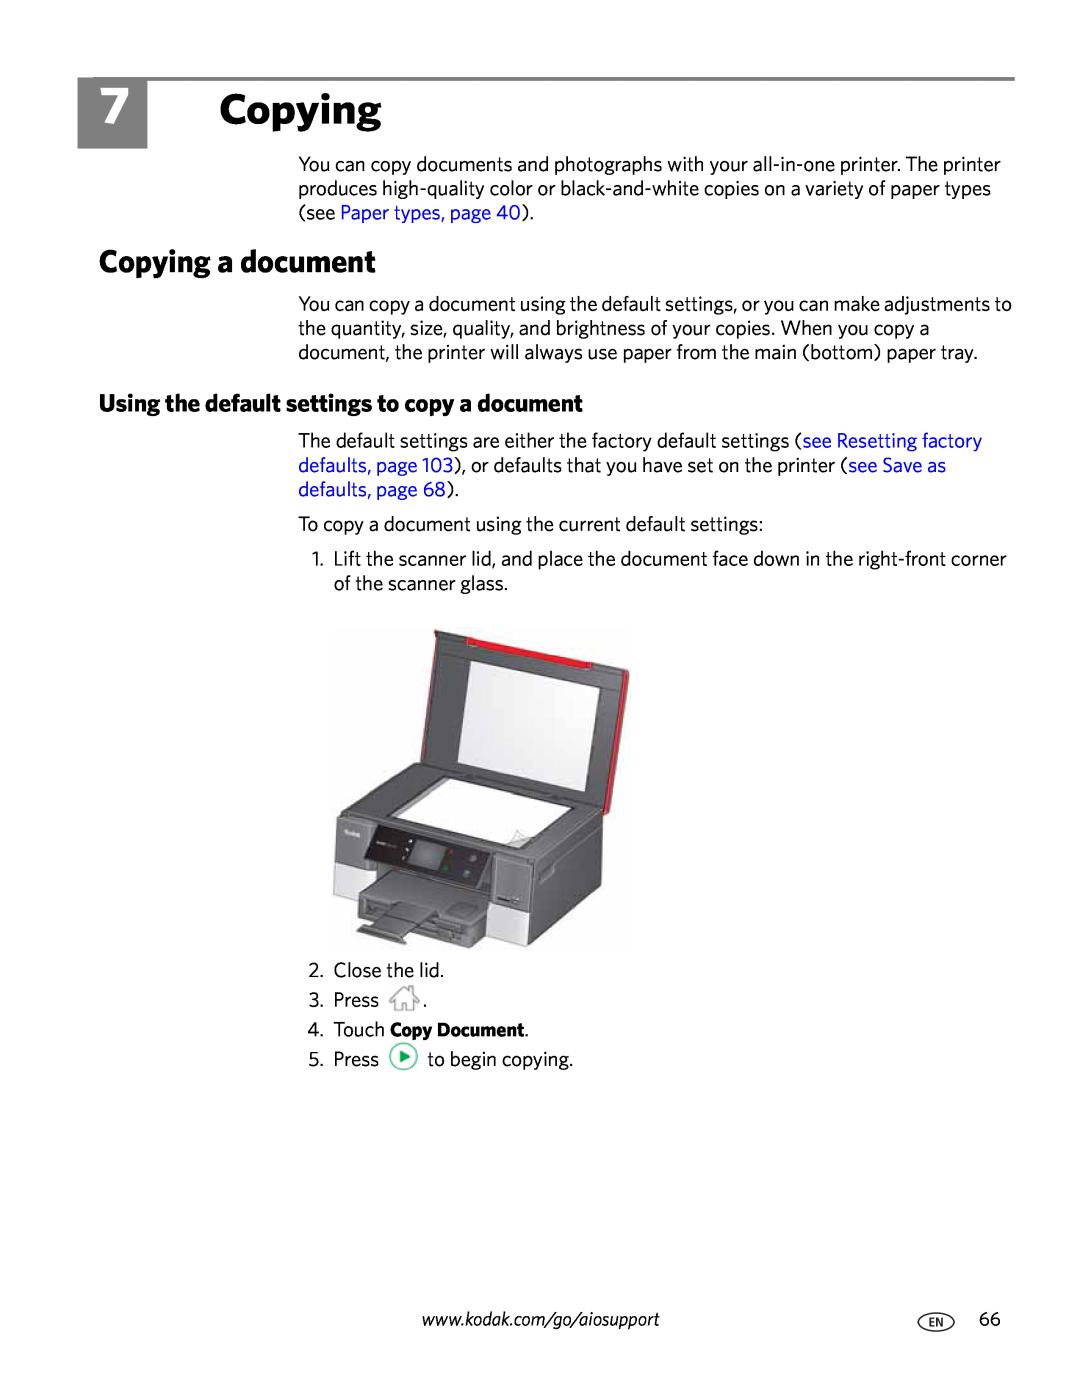 Kodak 7.1 manual Copying a document, Using the default settings to copy a document 